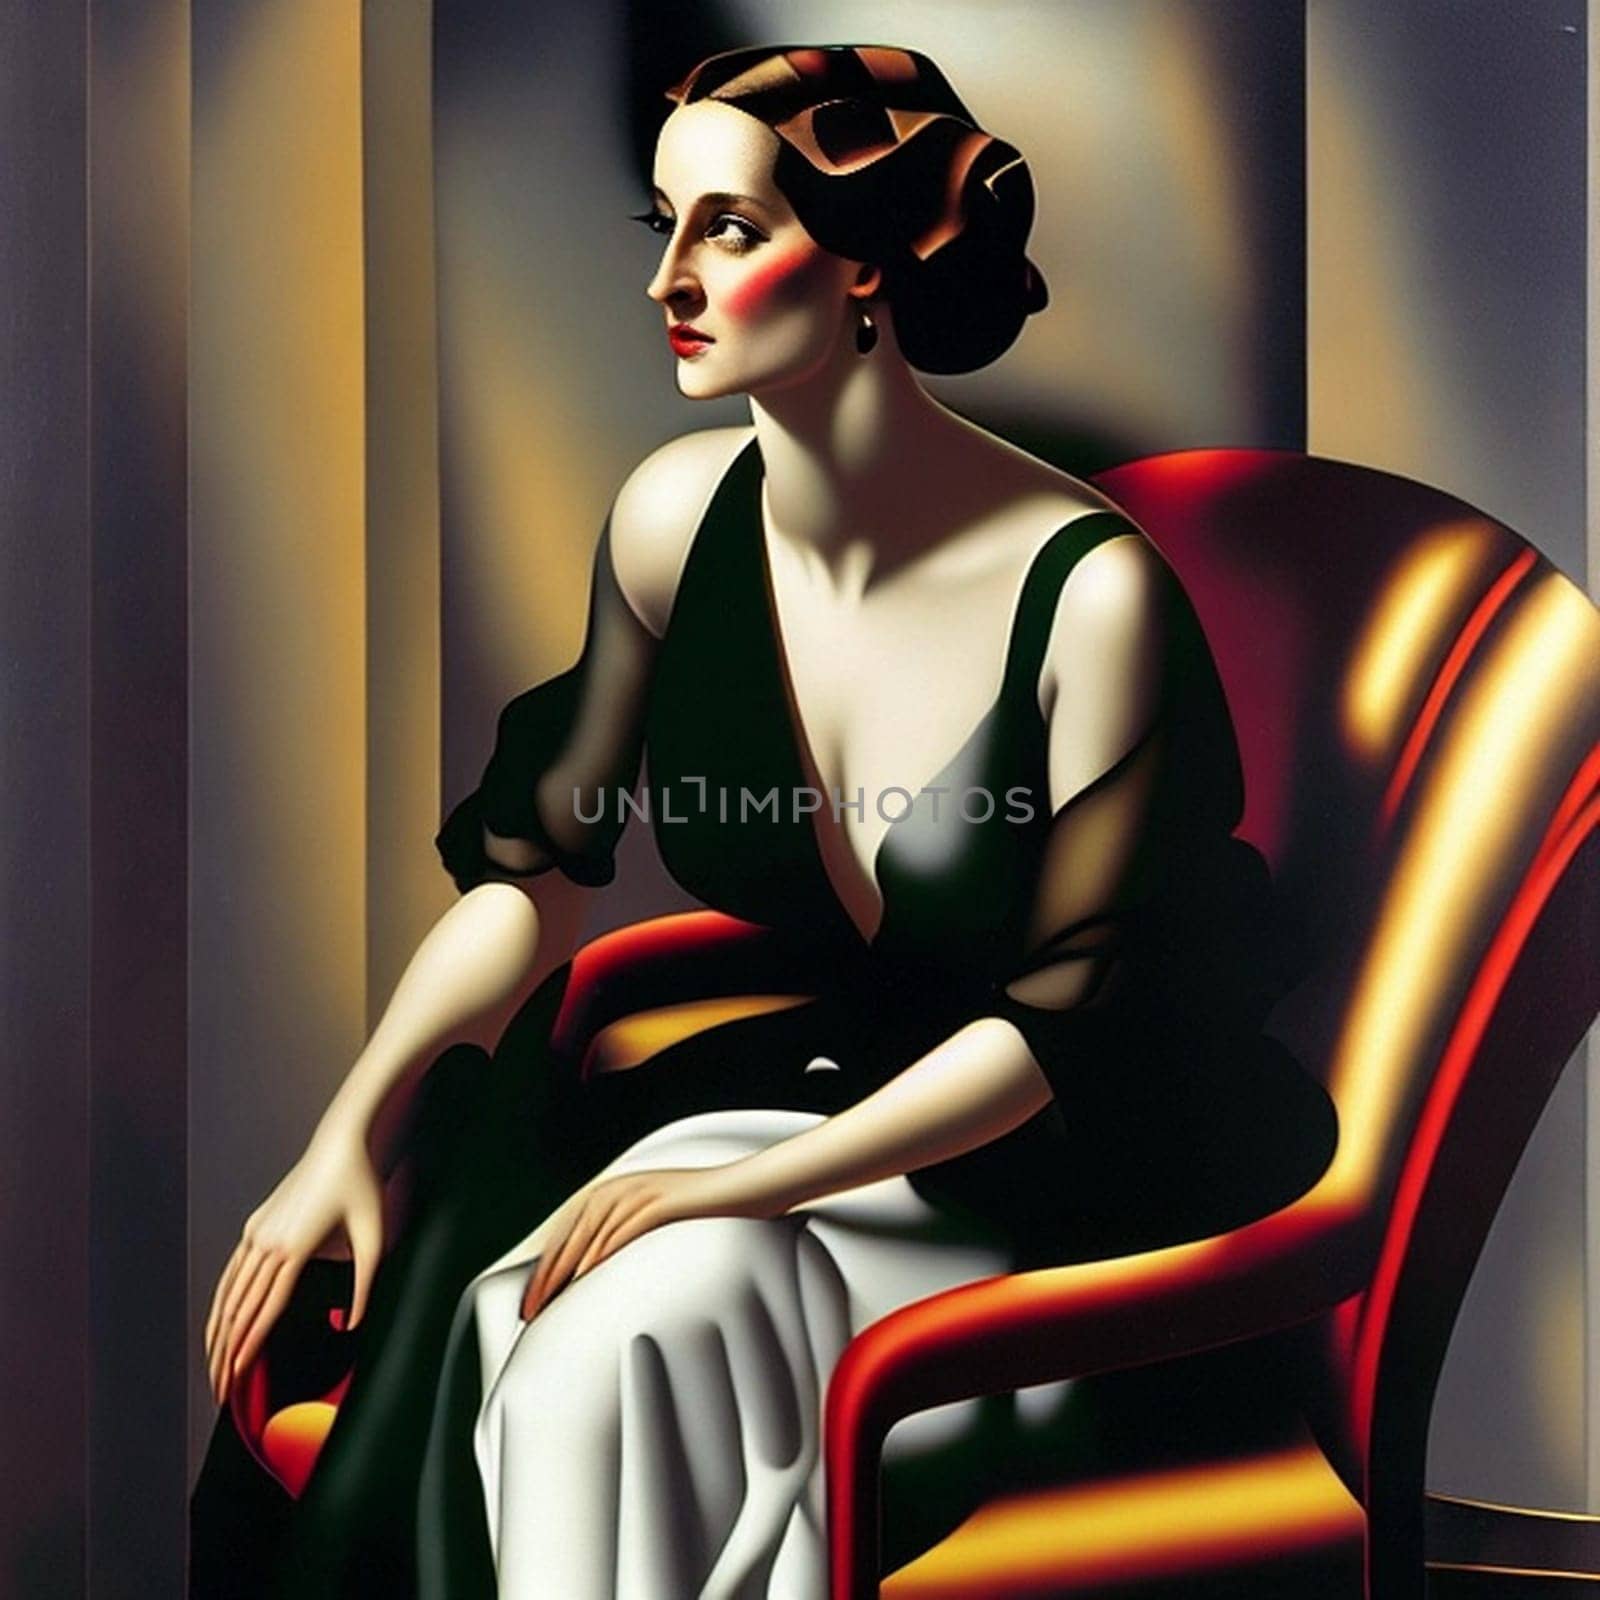 This captivating portrait depicts a woman seated on a chair in the style of Tamara de Lempicka. The AI-generated artwork boasts a contemporary composition that cleverly blends fantasy and emotion. The woman's expression is intense, her face illuminated by the artistic intelligence of the piece. This portrait is a conceptual masterpiece that perfectly captures the essence of modern femininity.